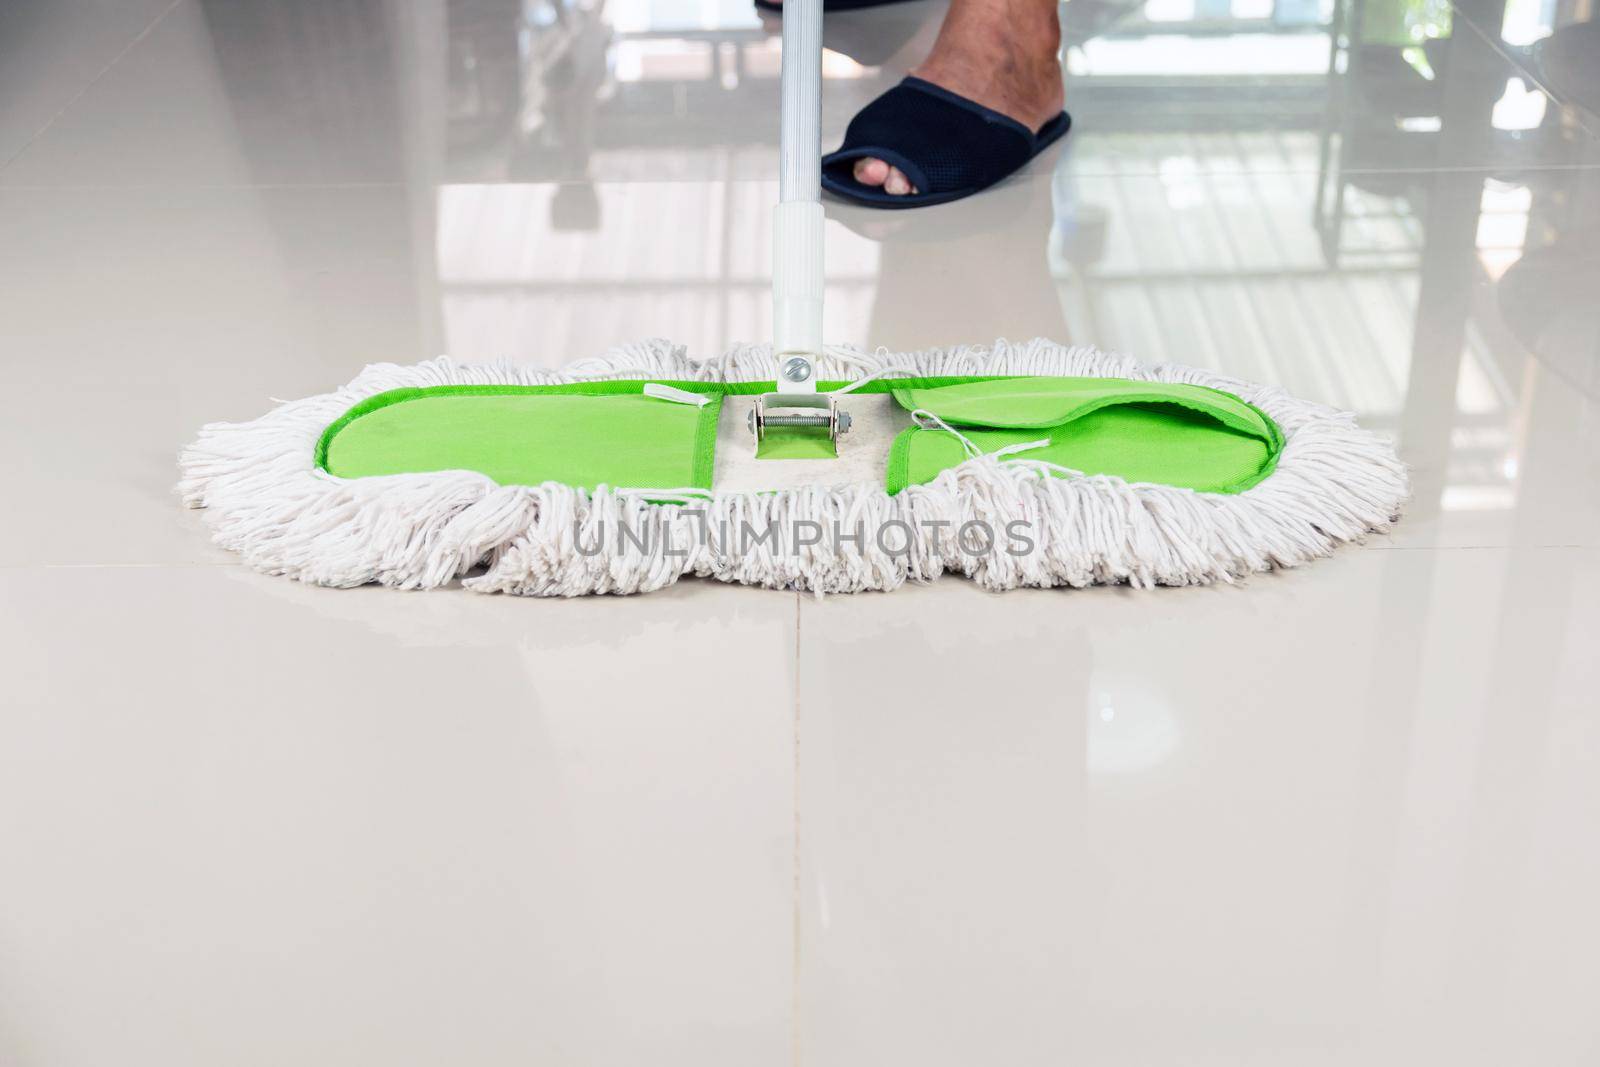 Clean the tile floor with a mop.